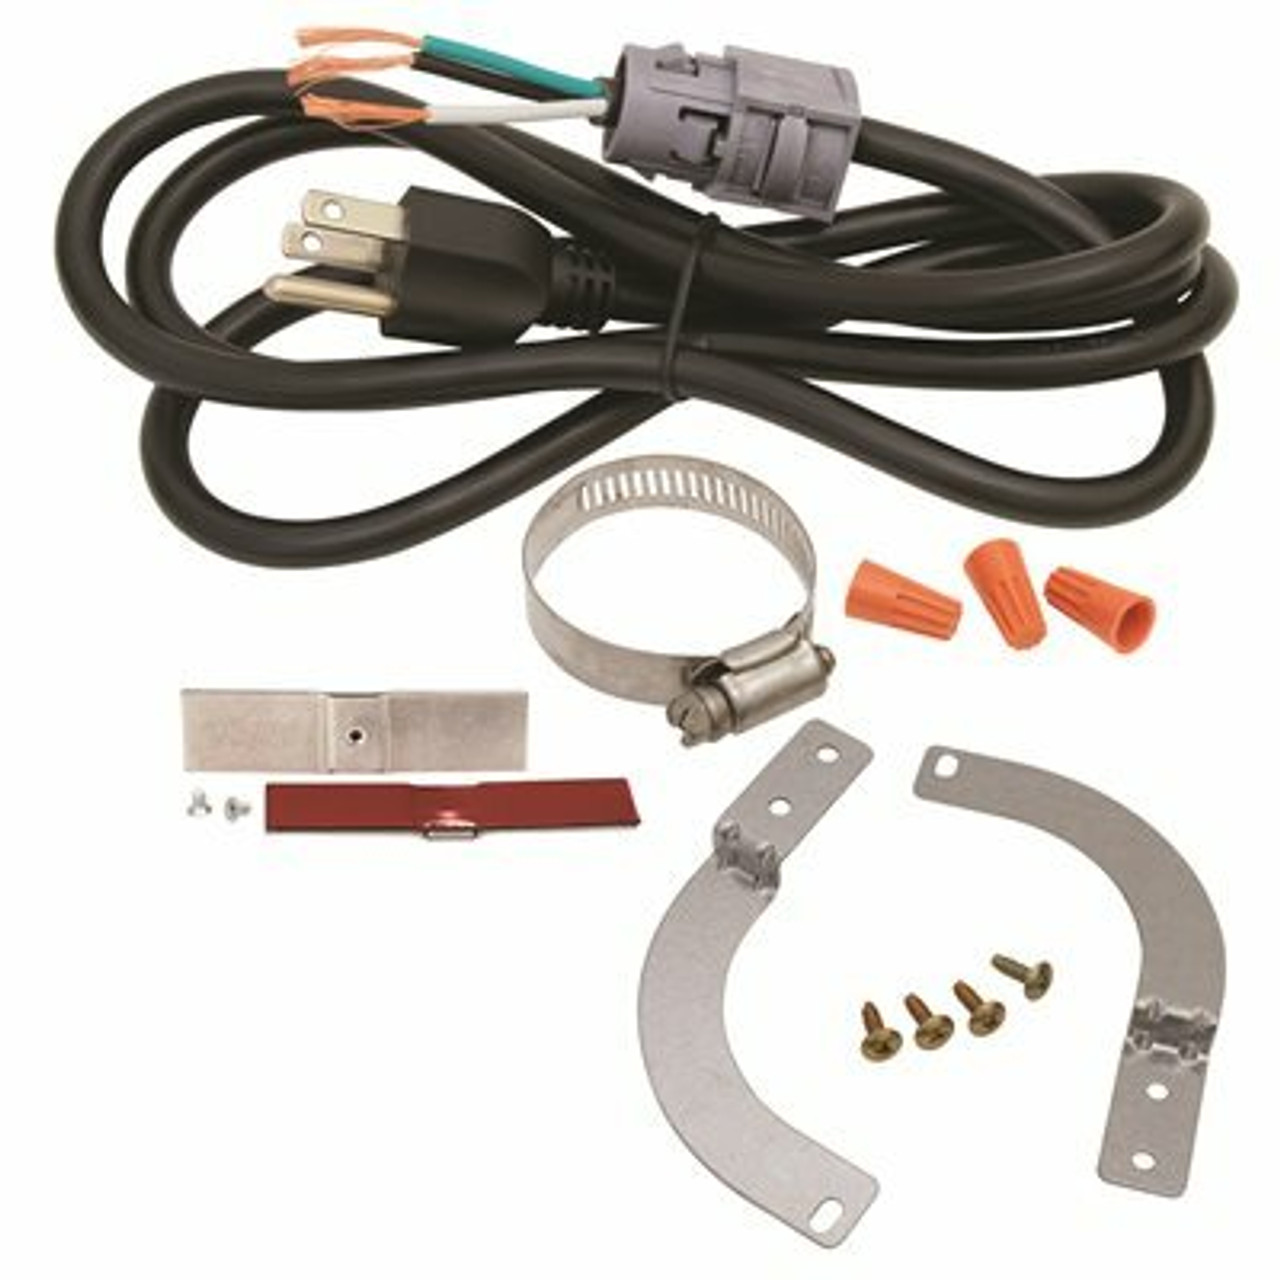 Ge Includes Clamp, Bracket Kit And Granite Grabbers And 5 Ft 4 In Power Cord